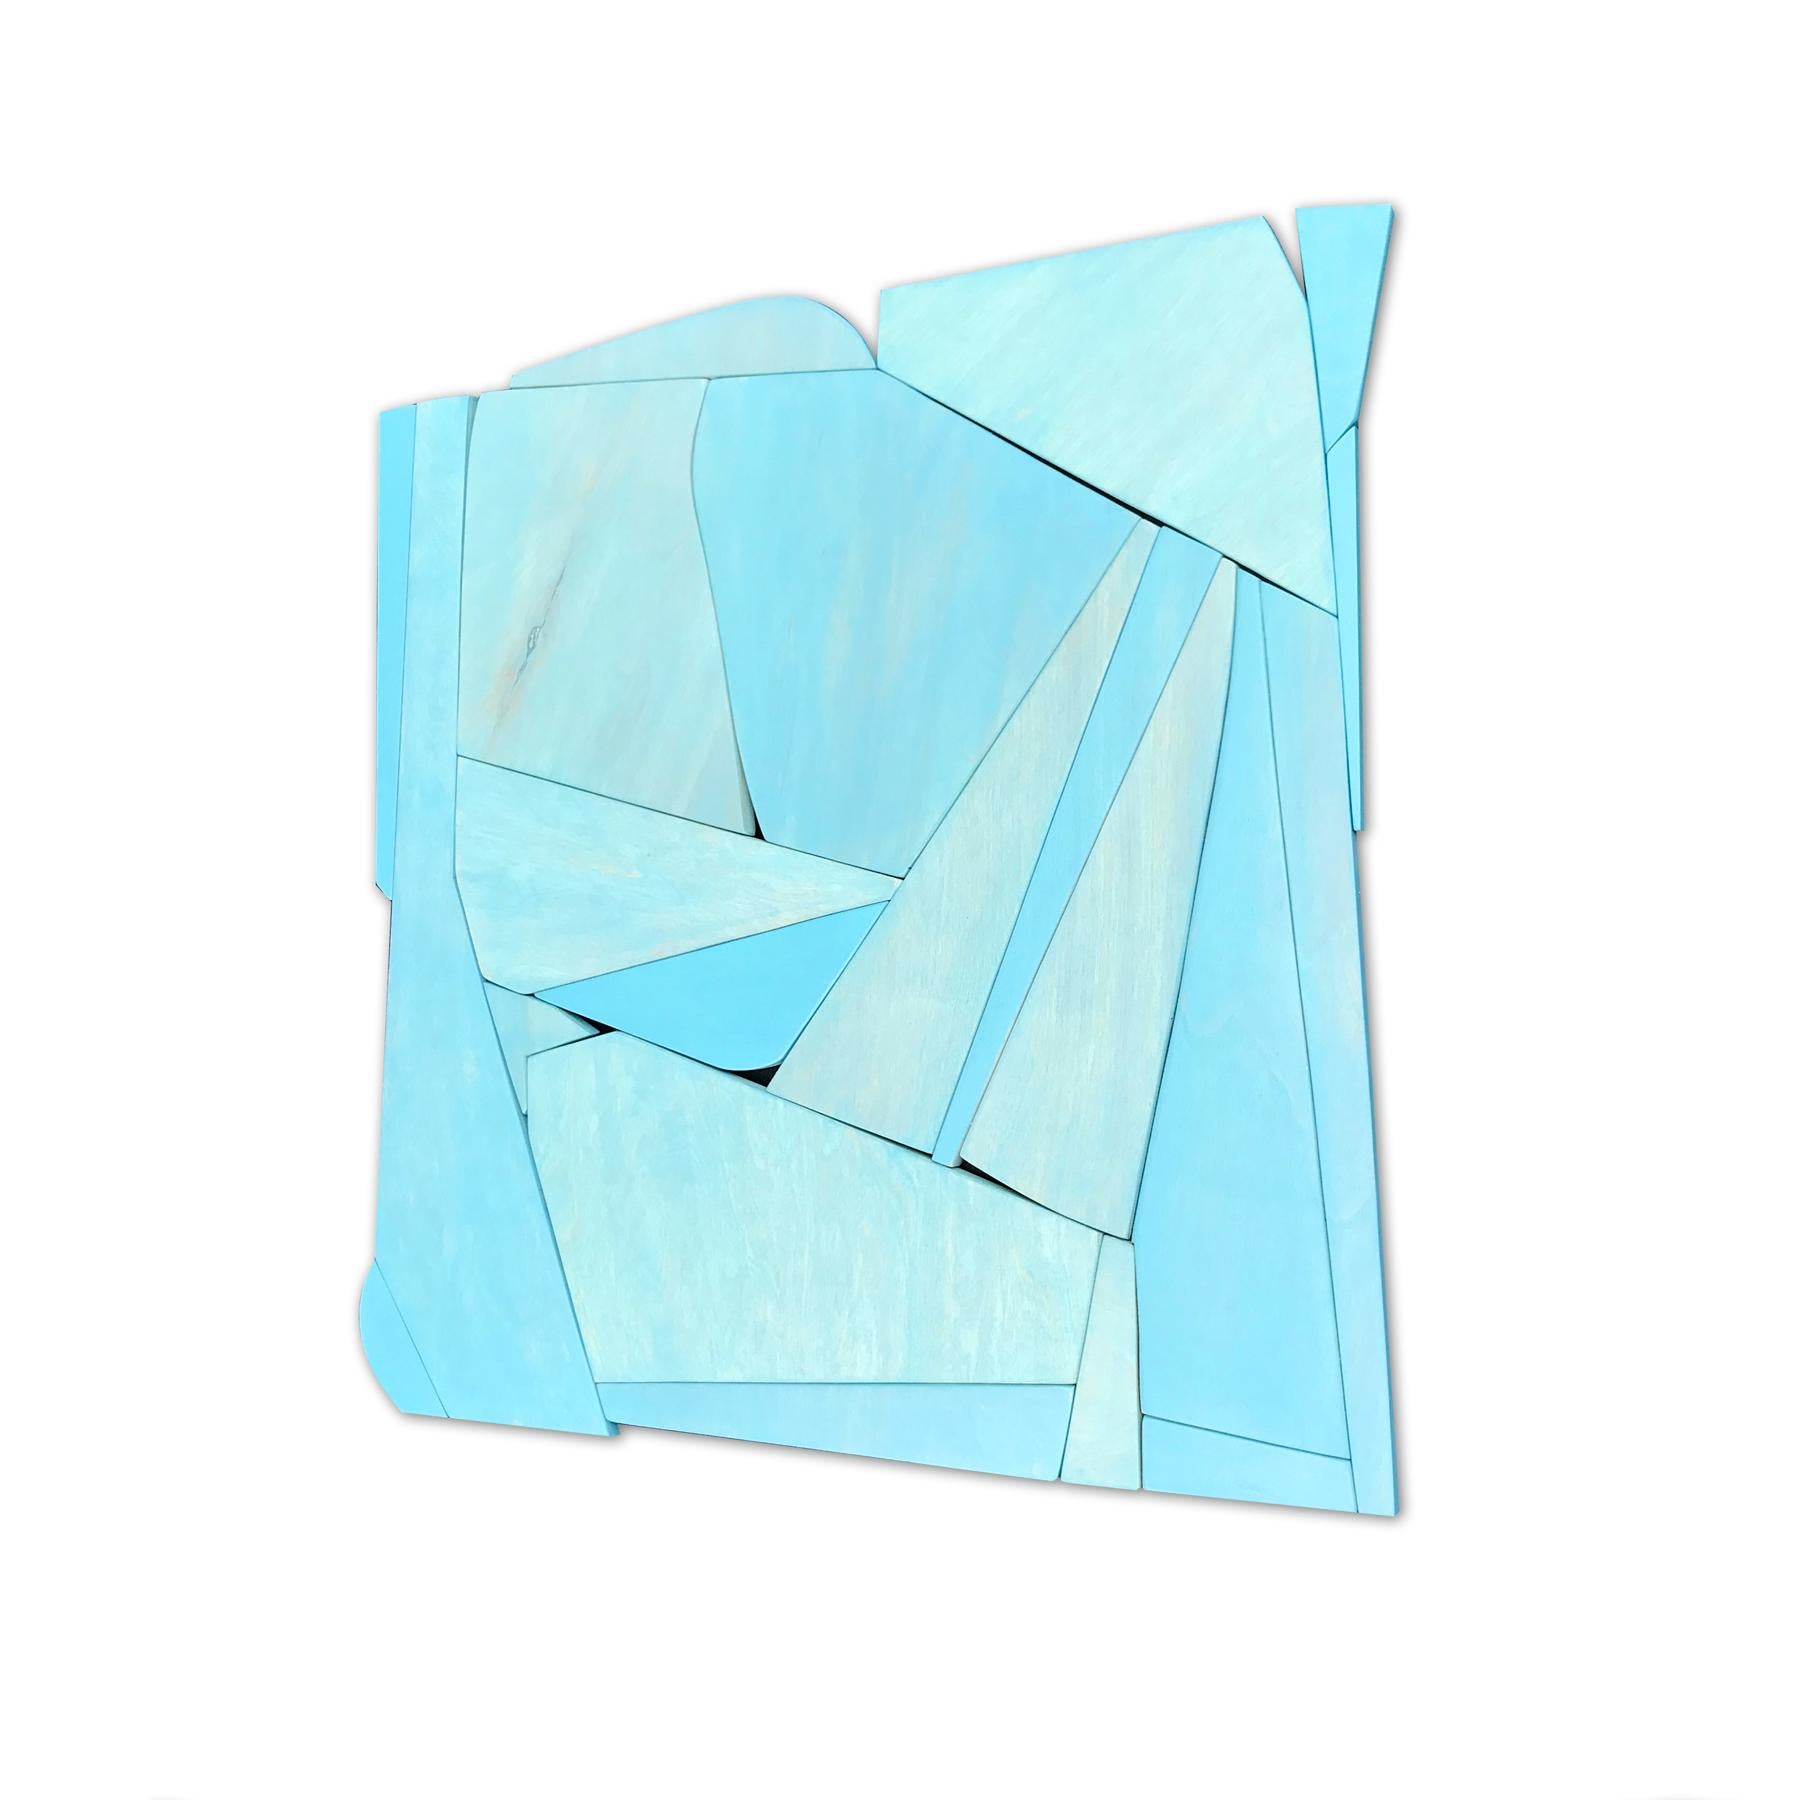 Blue is a discreet and elegant minimalist contemporary wall sculpture. It is constructed with high-end birch plywood, acrylic washes and completed with a hand waxed finish. The acrylic wash allows the wood grain to show through the paint and creates